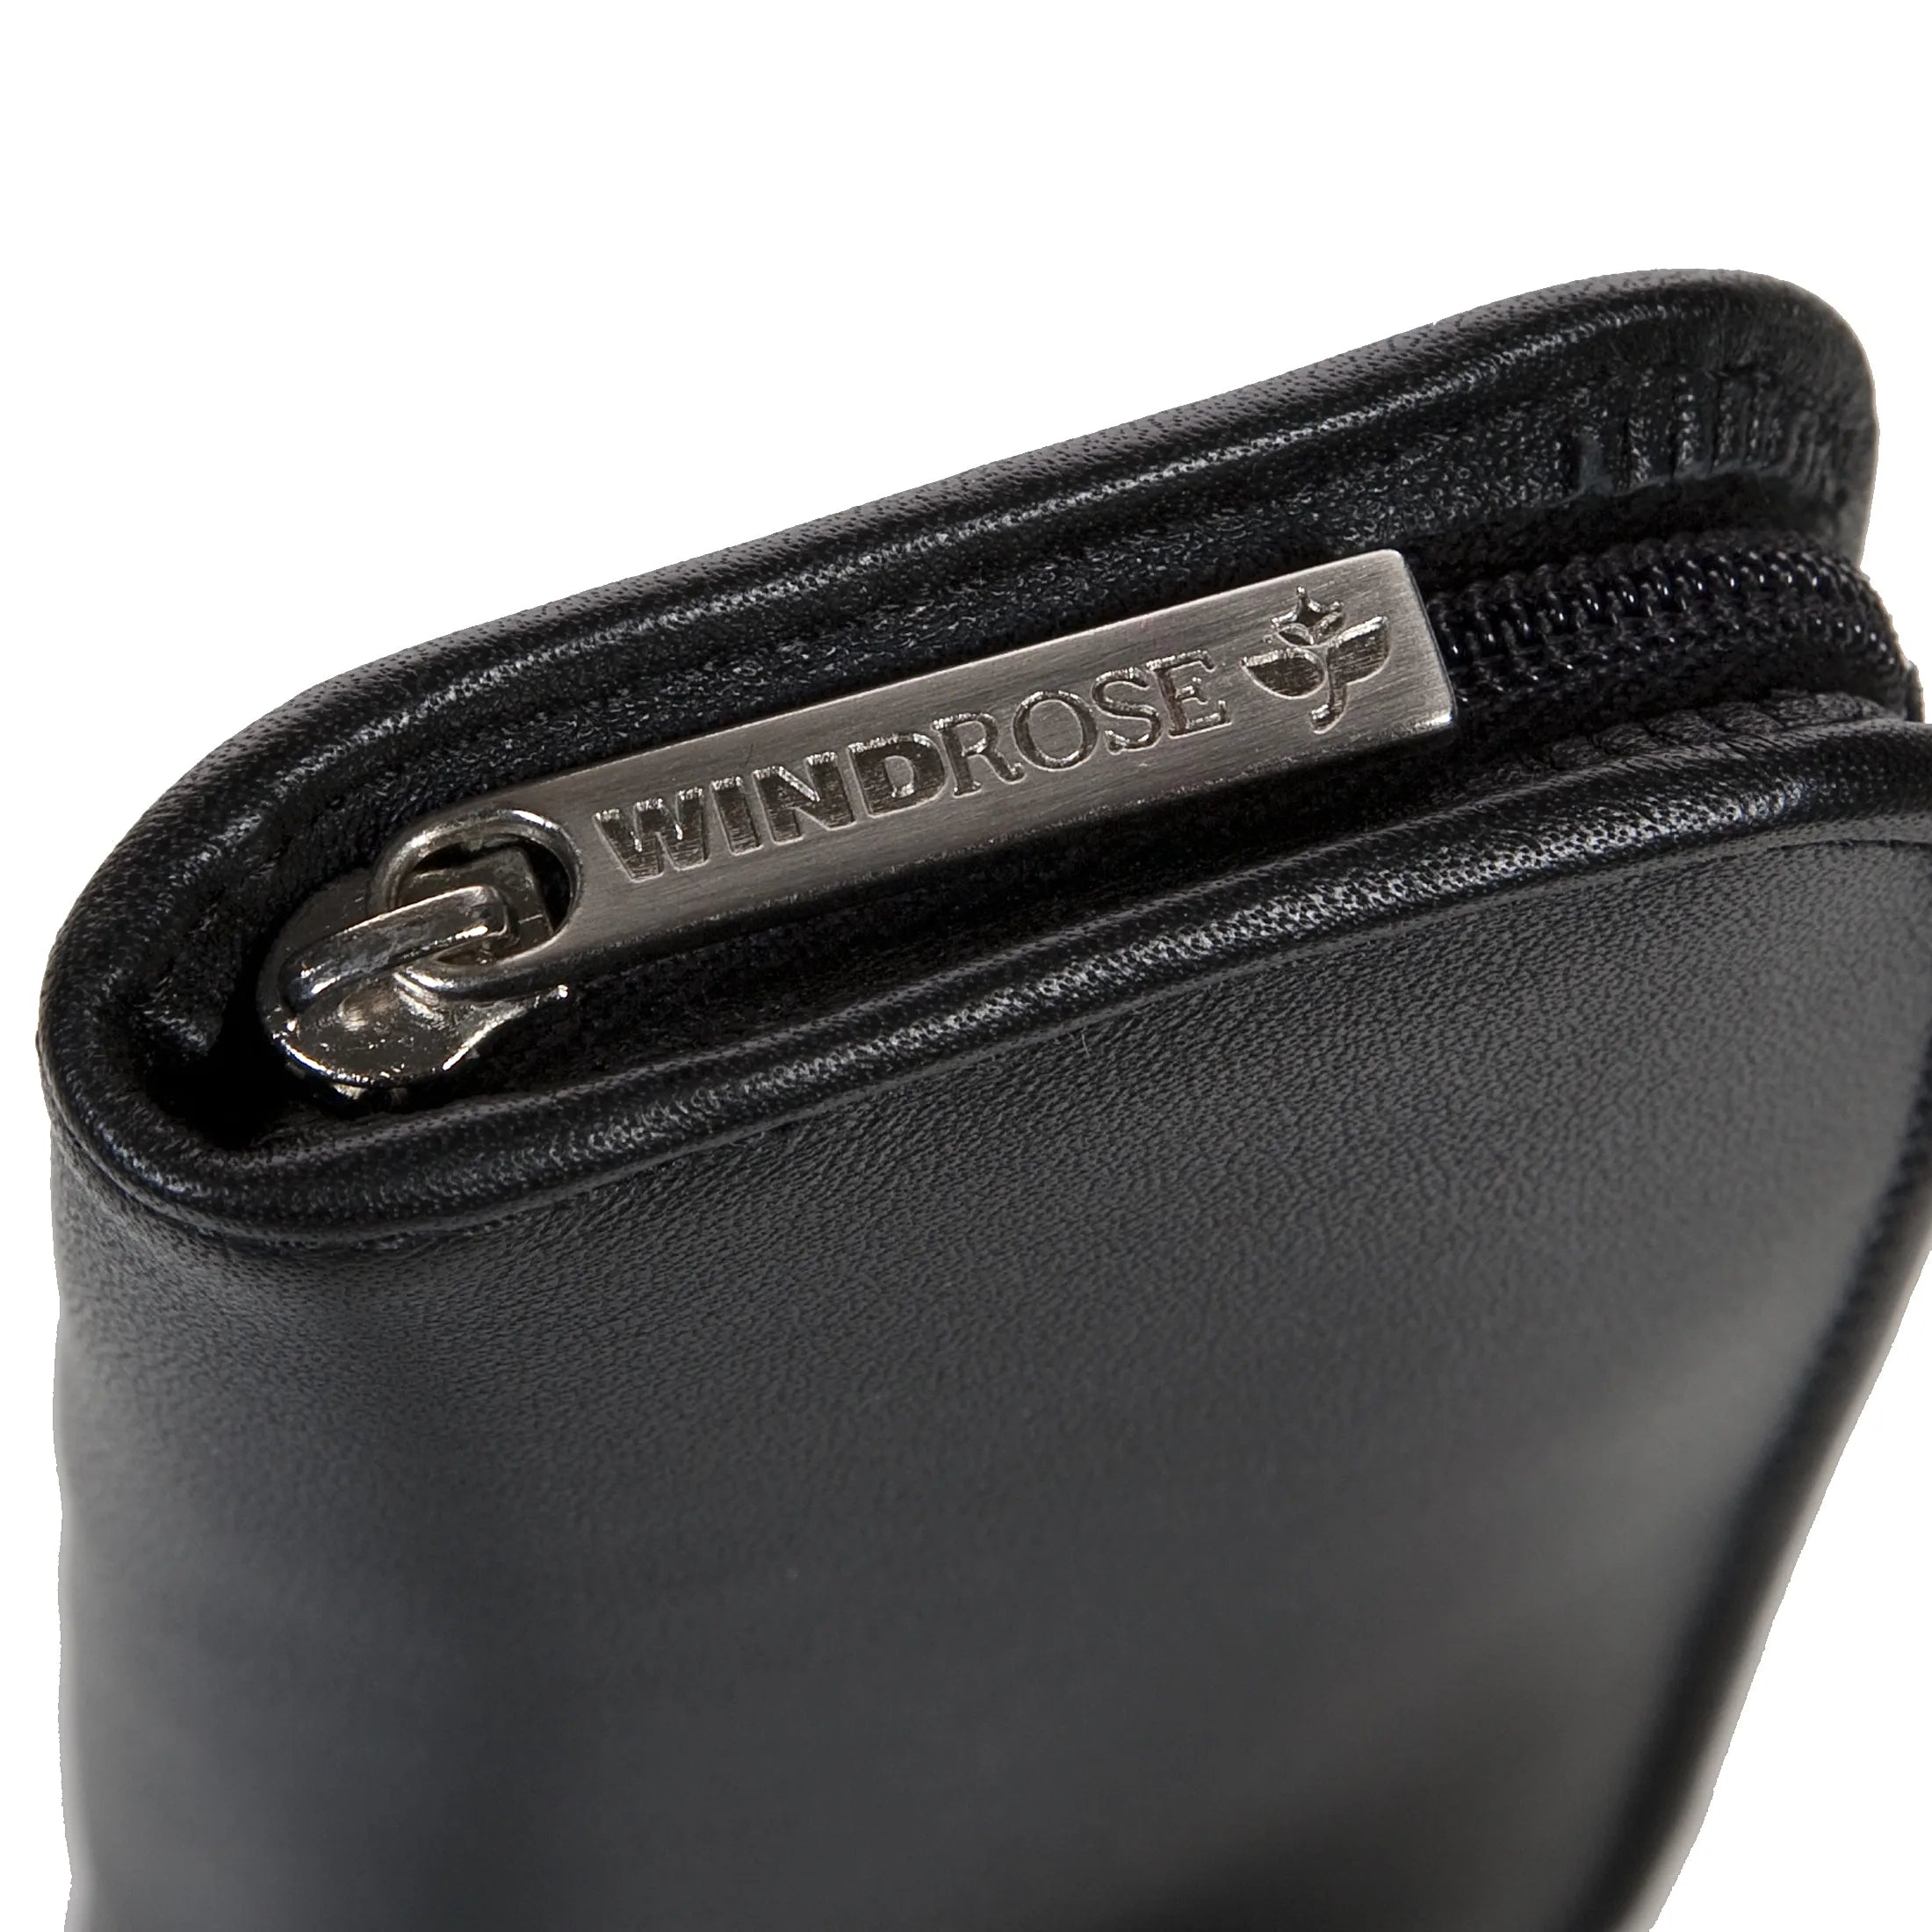 Windrose Nappa Manicure zipper case made of leather - black